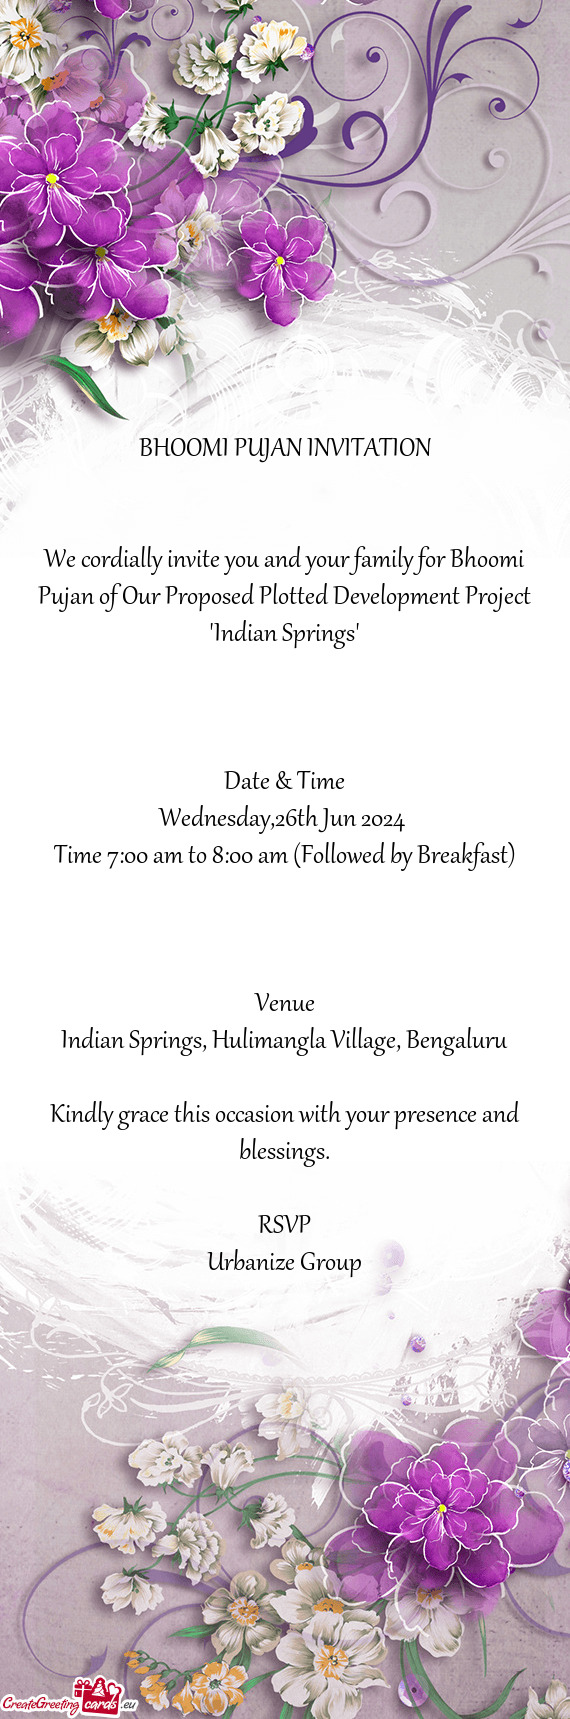 We cordially invite you and your family for Bhoomi Pujan of Our Proposed Plotted Development Project